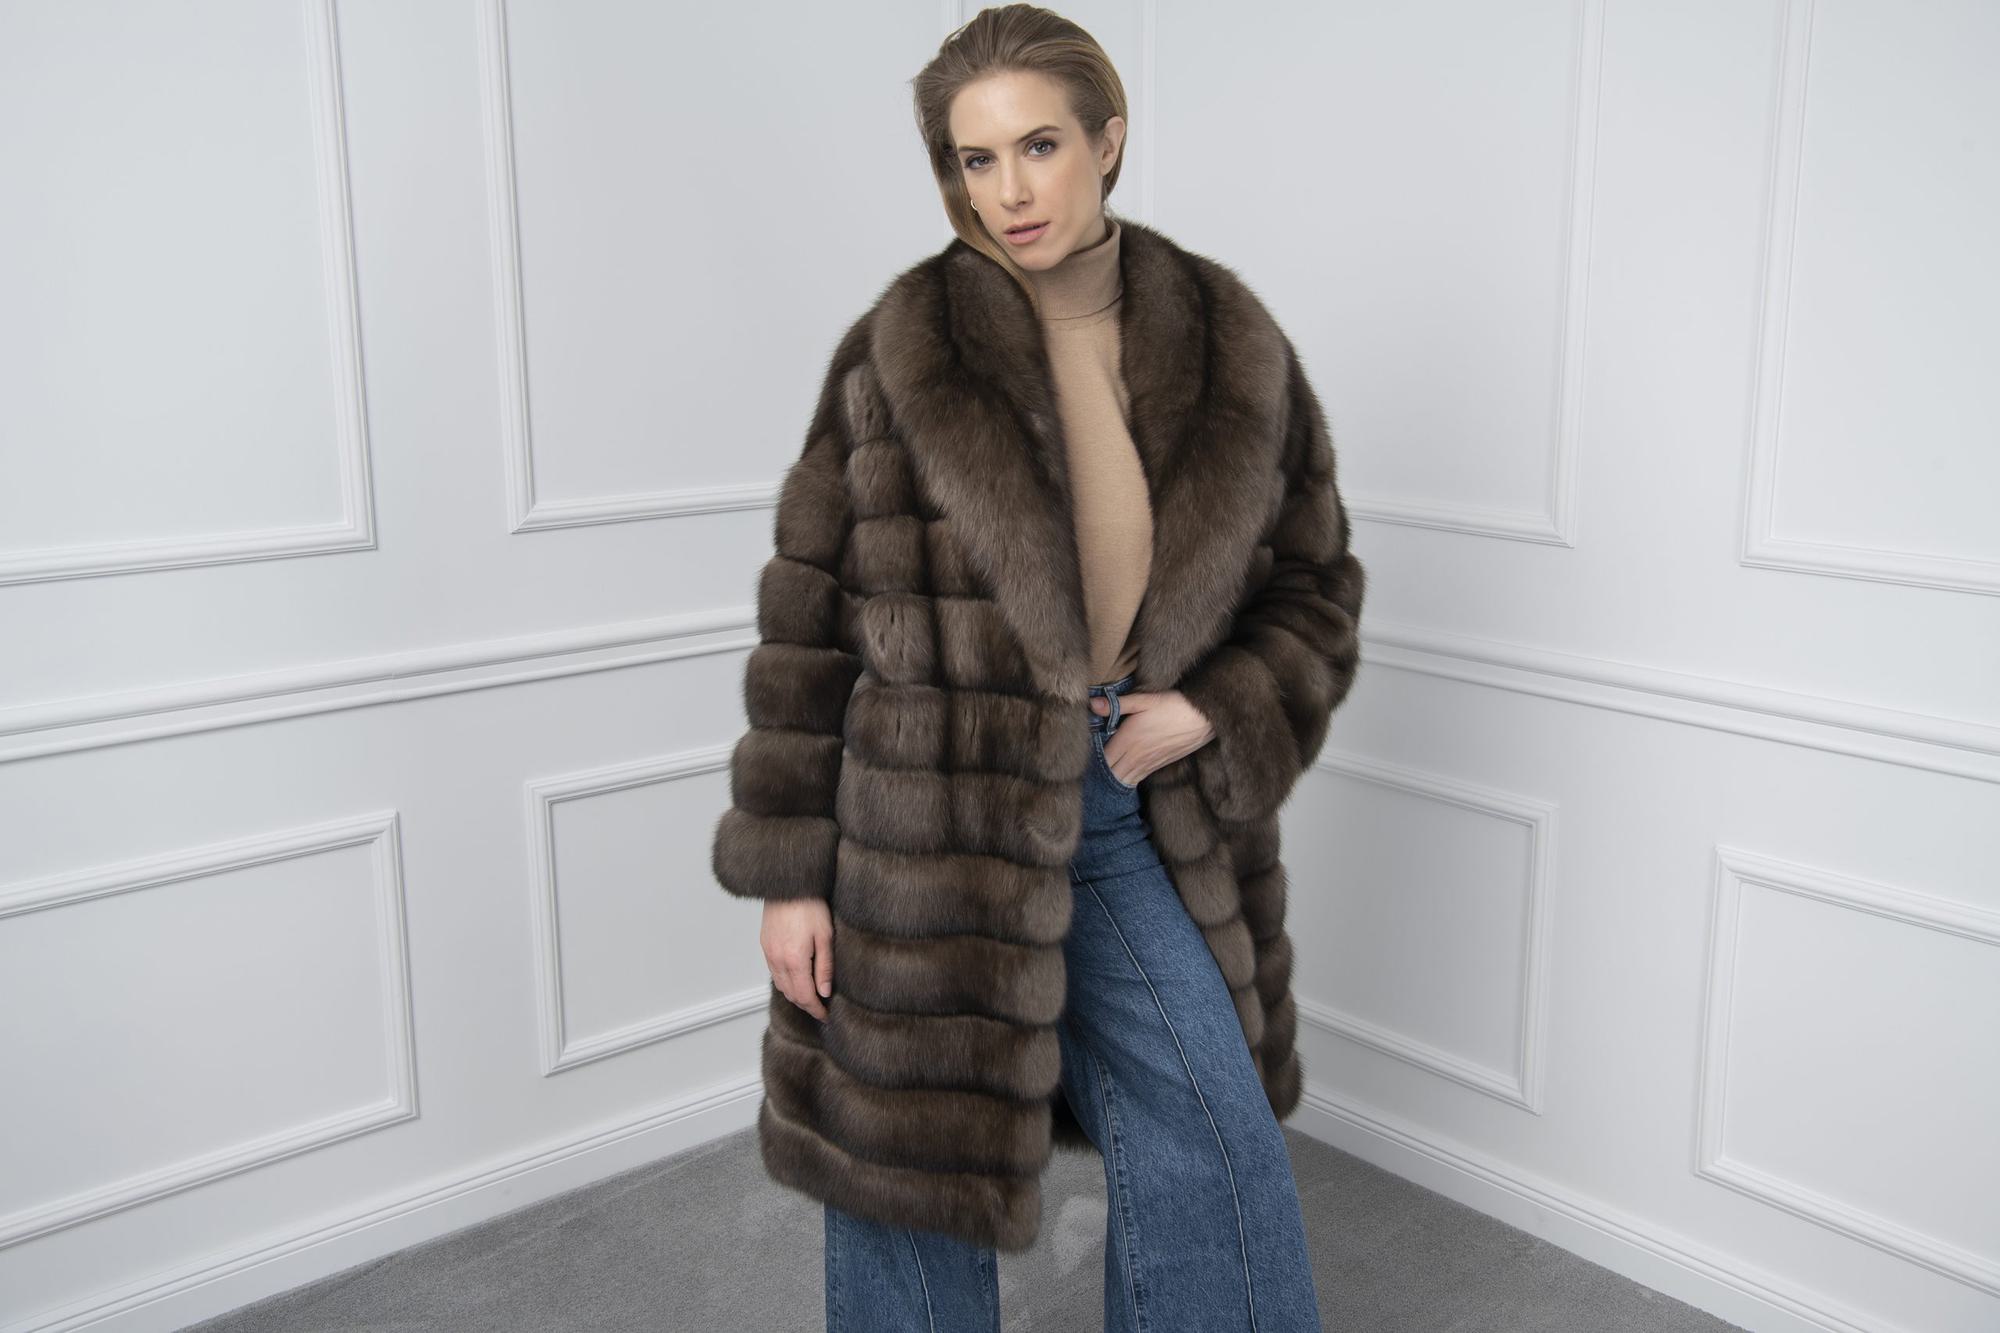 Sable fur long jacket with jeans